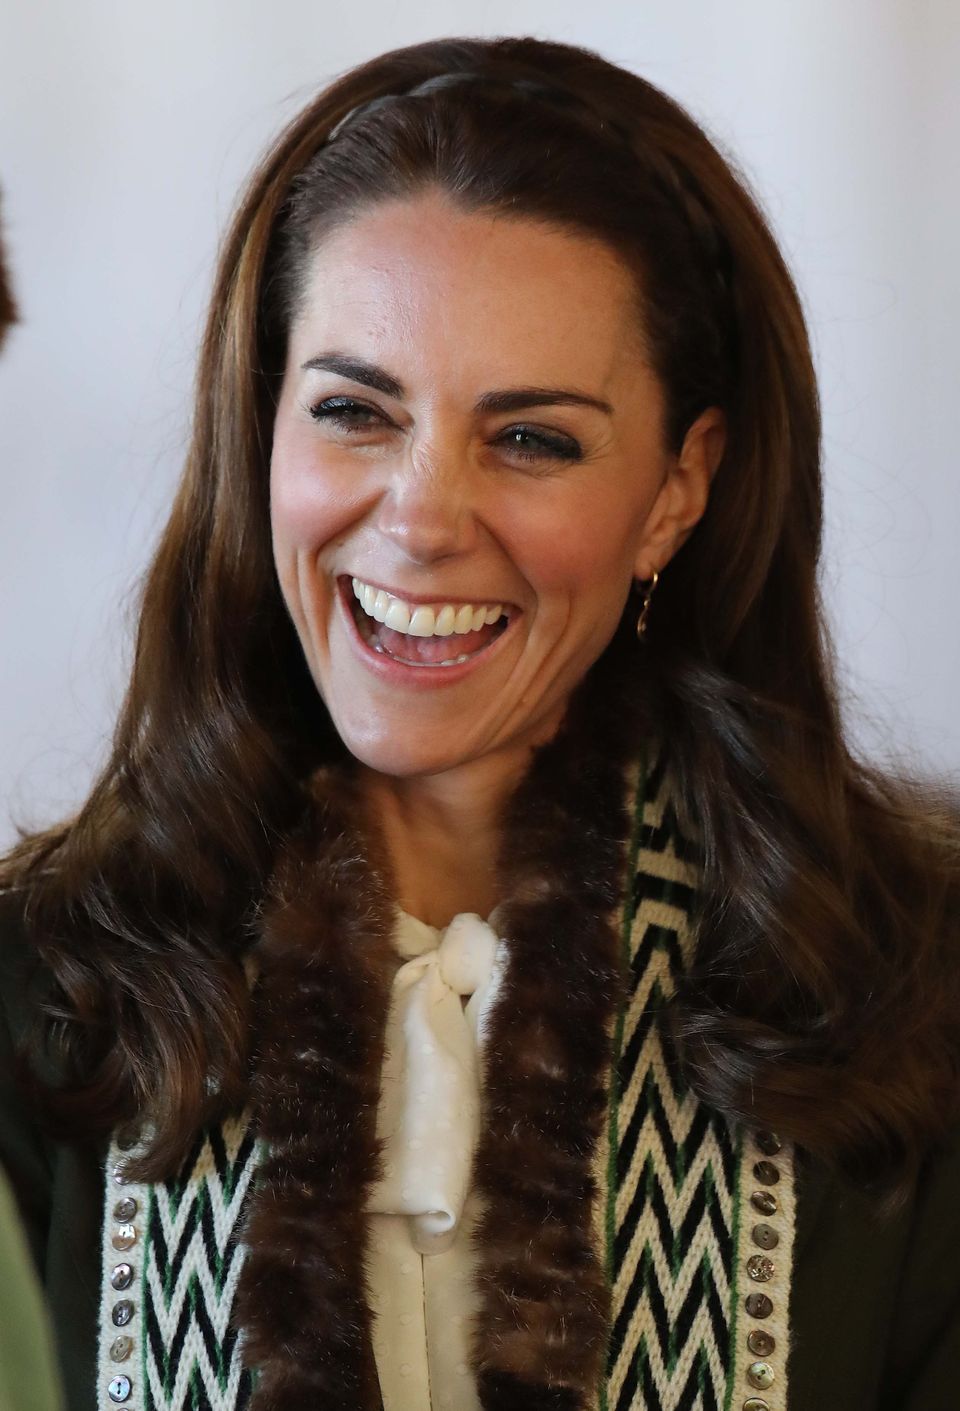 36 Wonderfully Candid Photos Of The Duchess Of Cambridge For Her 36th ...